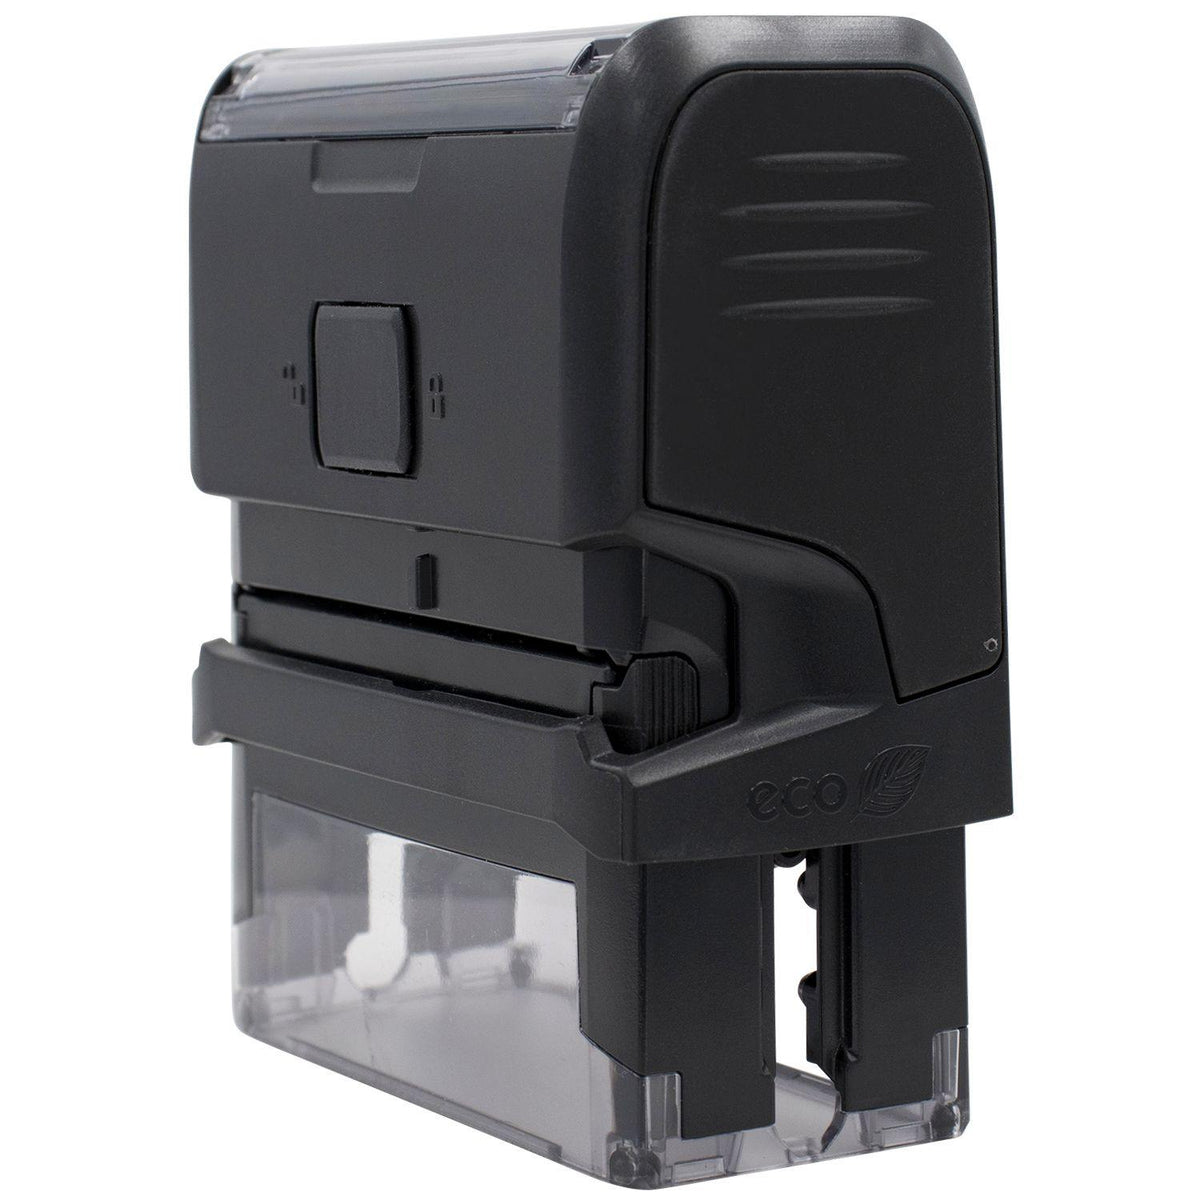 Self-Inking Times First Class Mail Stamp - Engineer Seal Stamps - Brand_Trodat, Impression Size_Small, Stamp Type_Self-Inking Stamp, Type of Use_Postal &amp; Mailing